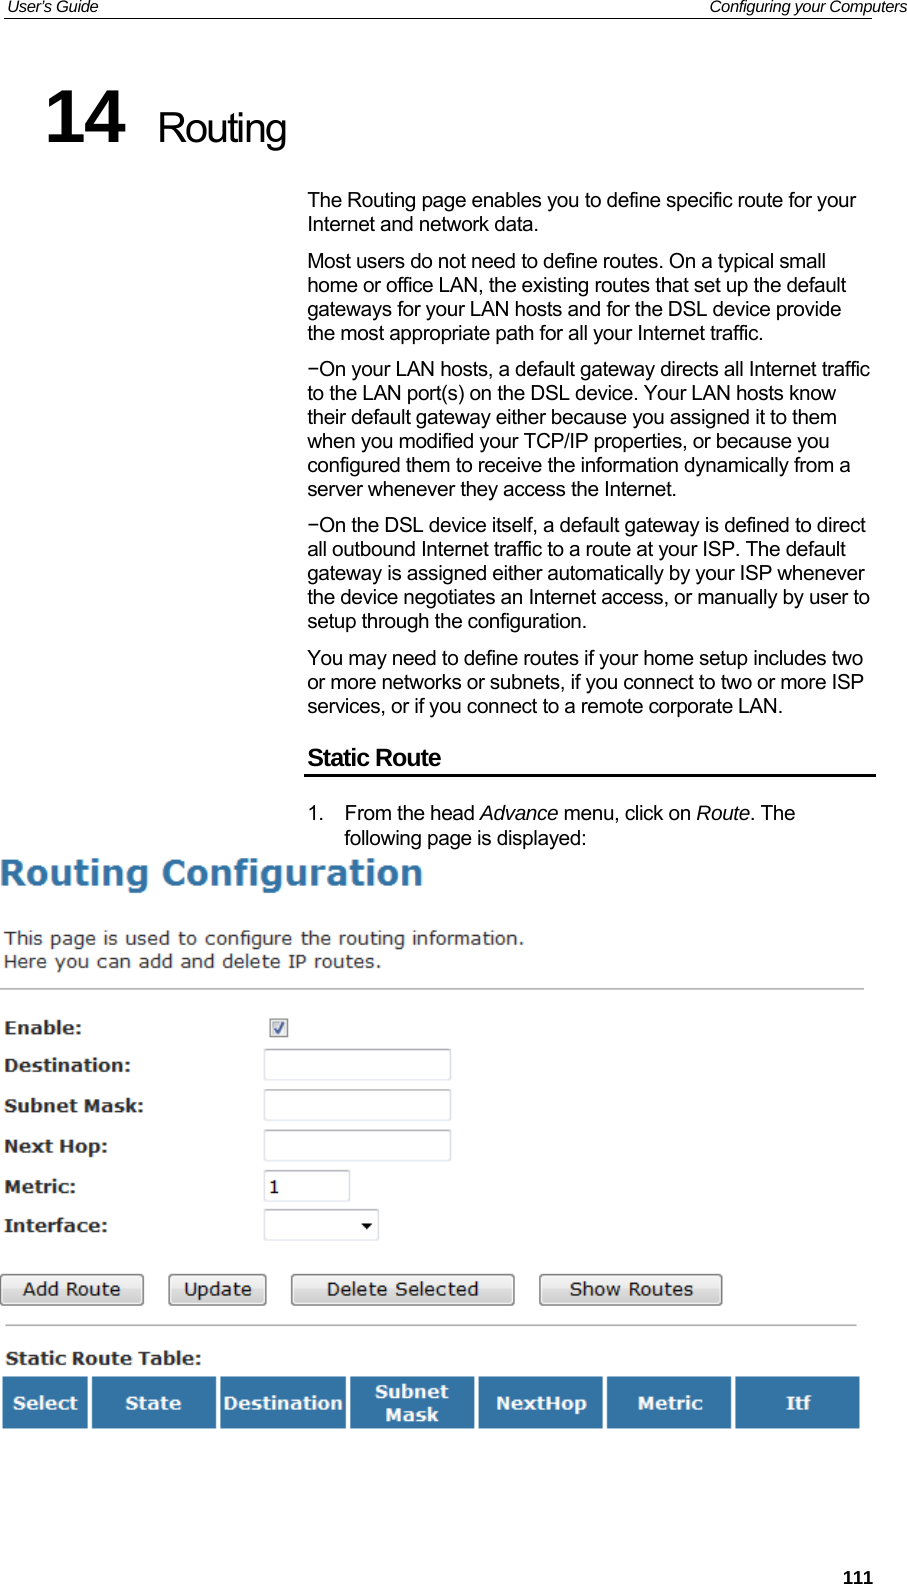 User’s Guide   Configuring your Computers 14  Routing The Routing page enables you to define specific route for your Internet and network data. Most users do not need to define routes. On a typical small home or office LAN, the existing routes that set up the default gateways for your LAN hosts and for the DSL device provide the most appropriate path for all your Internet traffic. −On your LAN hosts, a default gateway directs all Internet traffic to the LAN port(s) on the DSL device. Your LAN hosts know their default gateway either because you assigned it to them when you modified your TCP/IP properties, or because you configured them to receive the information dynamically from a server whenever they access the Internet. −On the DSL device itself, a default gateway is defined to direct all outbound Internet traffic to a route at your ISP. The default gateway is assigned either automatically by your ISP whenever the device negotiates an Internet access, or manually by user to setup through the configuration. You may need to define routes if your home setup includes two or more networks or subnets, if you connect to two or more ISP services, or if you connect to a remote corporate LAN. Static Route 1. From the head Advance menu, click on Route. The following page is displayed:     111